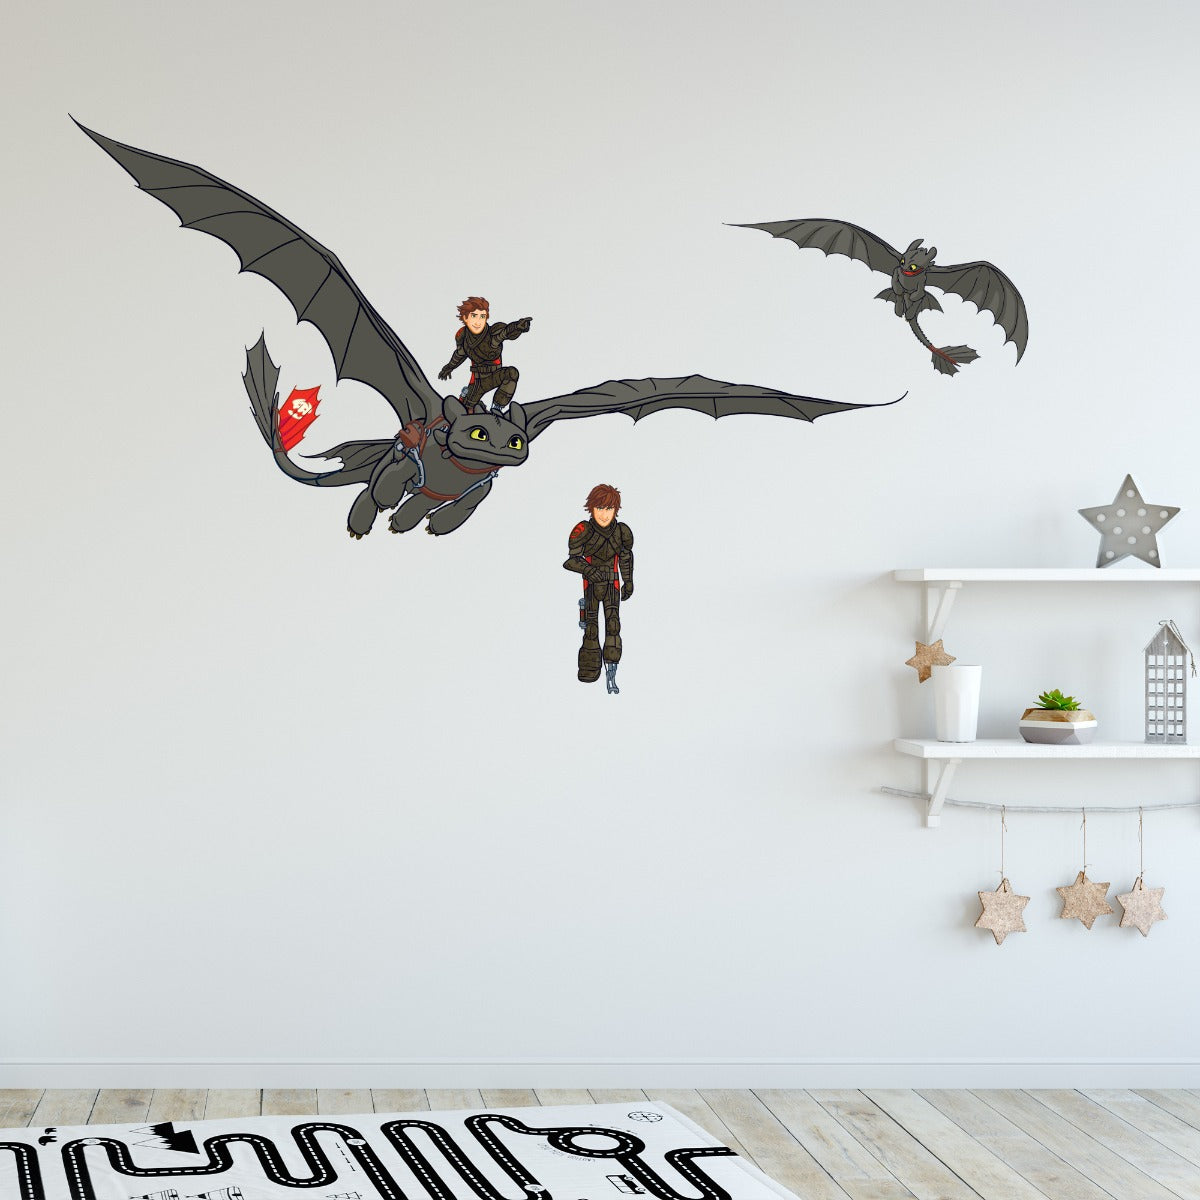 How To Train Your Dragon Hiccup Toothless Wall Sticker